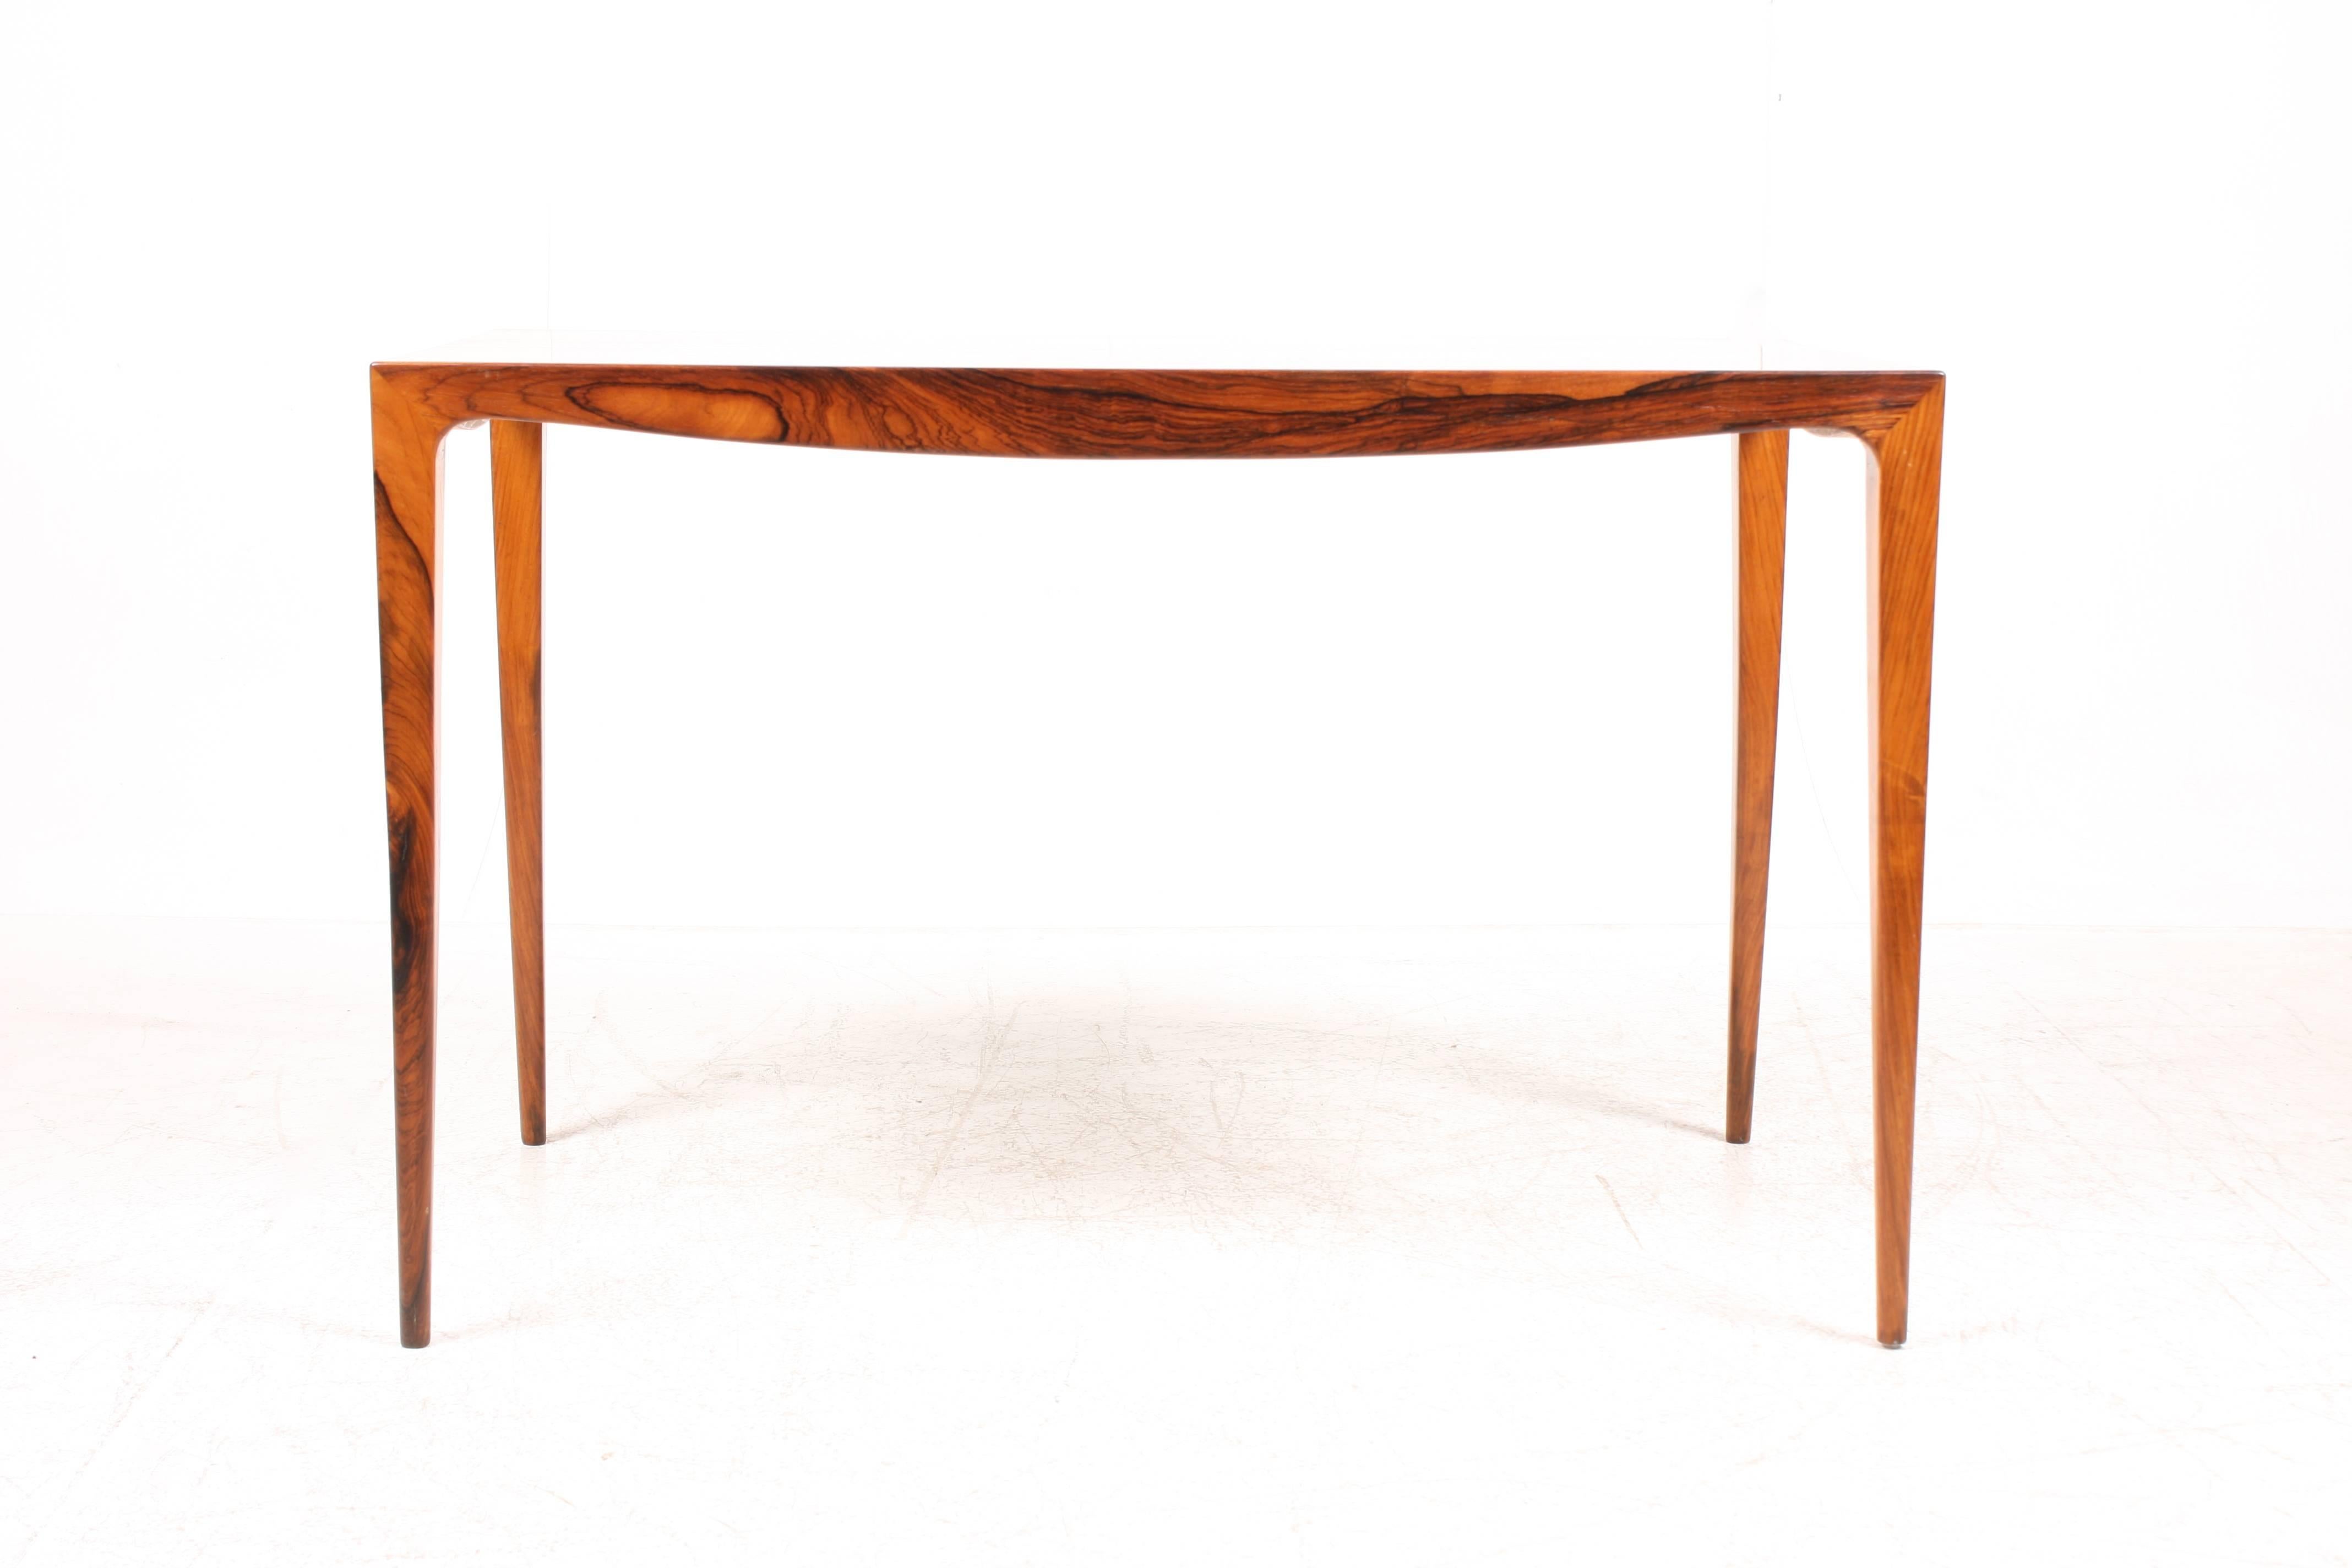 Small low table in Brazilian rosewood designed by Ole Wanscher for AJ Iversen Cabinet Makers. Made in Denmark in the 1950s. Great original condition.